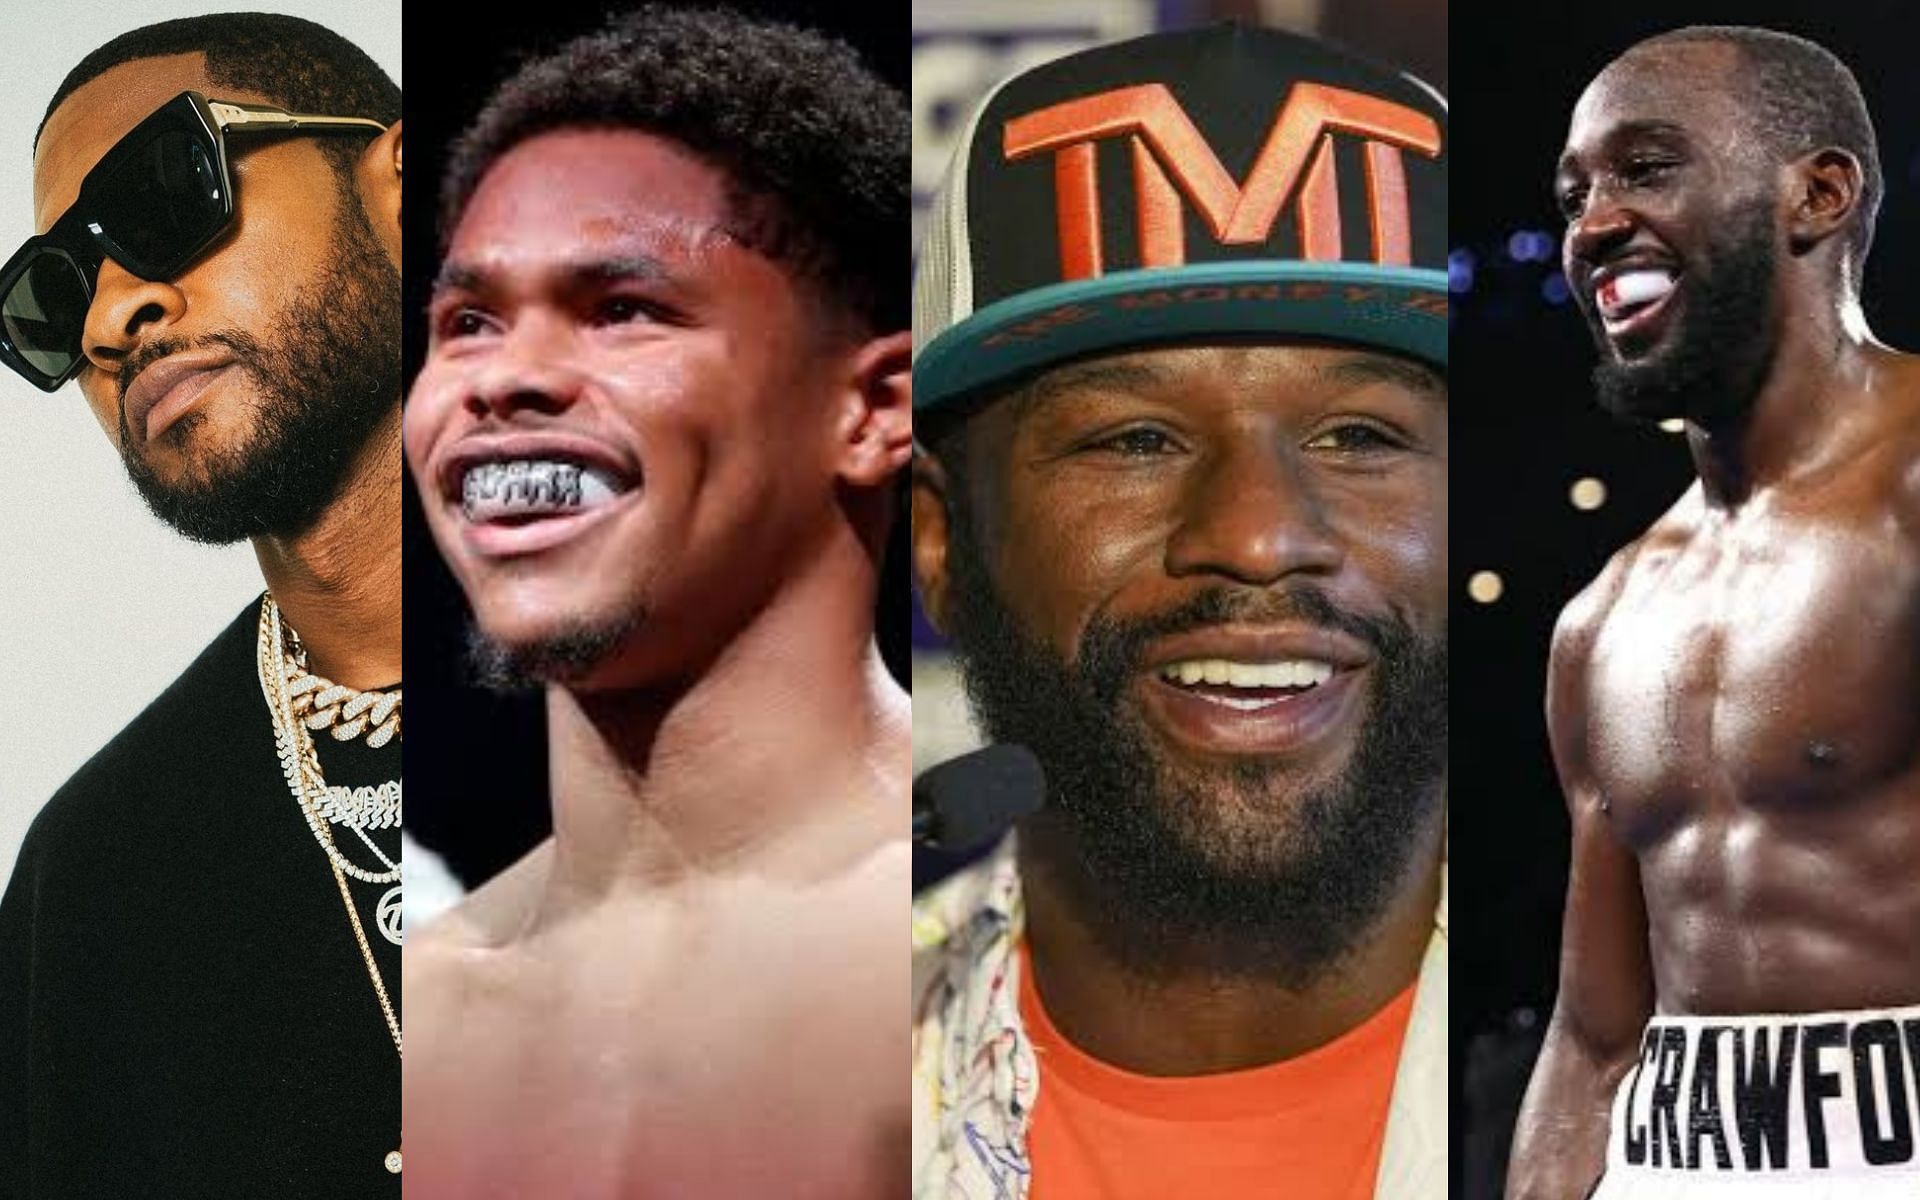 Usher, Shakur Stevenson, Floyd Mayweather, and Terrence Crawford (from left to right).